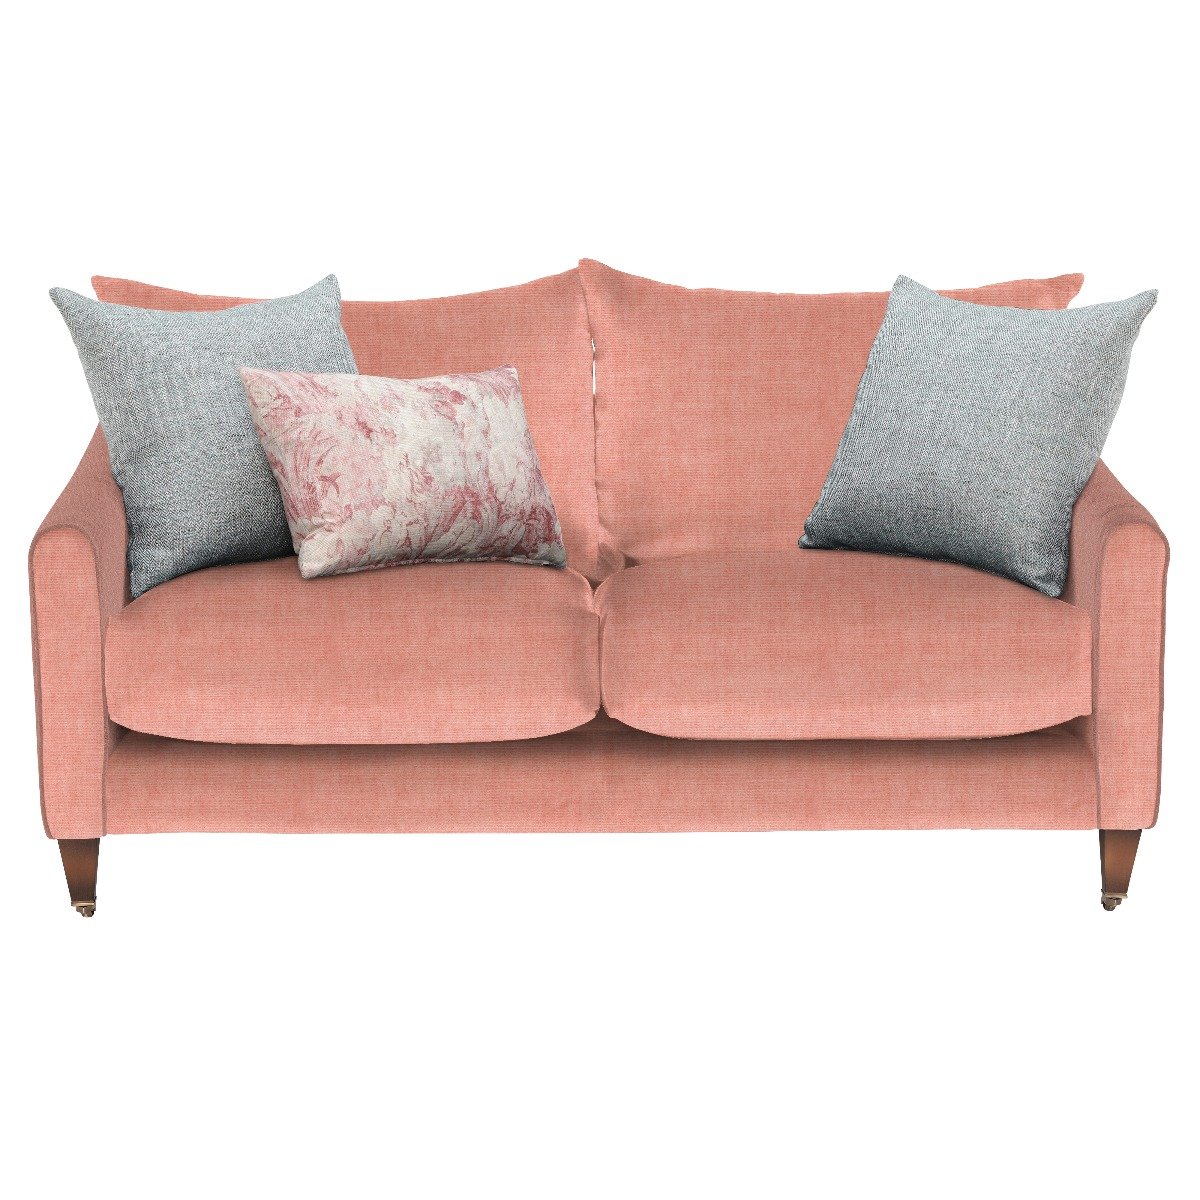 Harling 3 Seater Sofa, Pink Fabric | Barker & Stonehouse